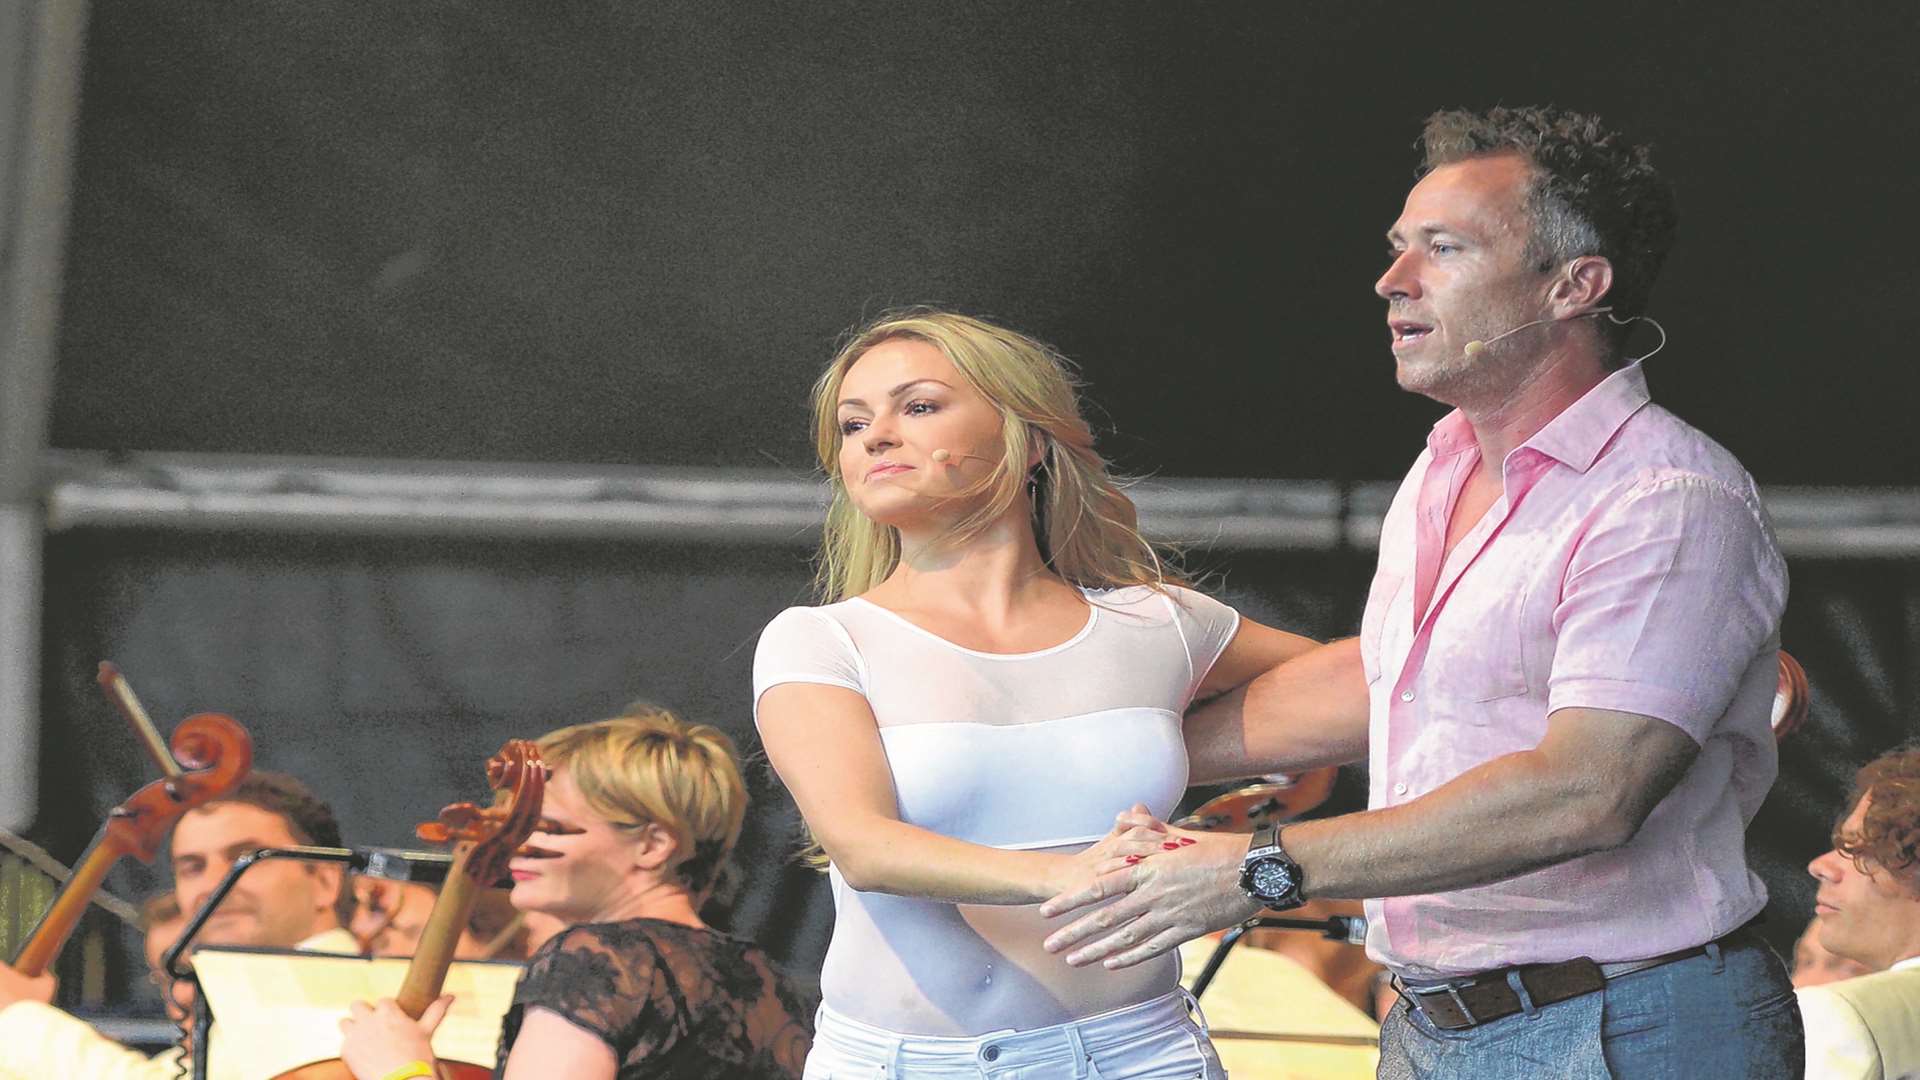 James and Ola Jordan lead the audience in a waltz